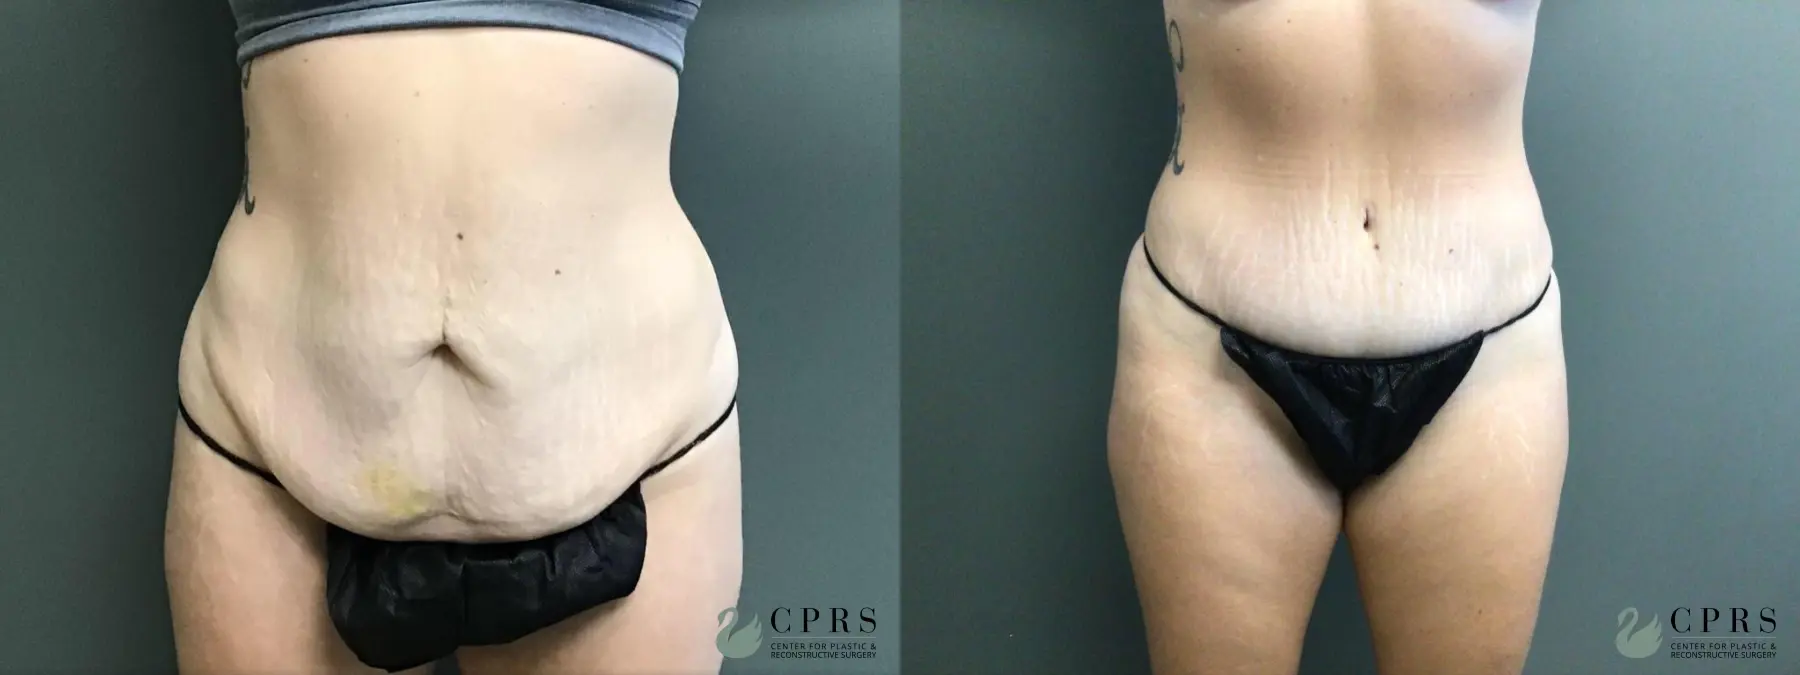 Abdominoplasty: Patient 2 - Before and After  